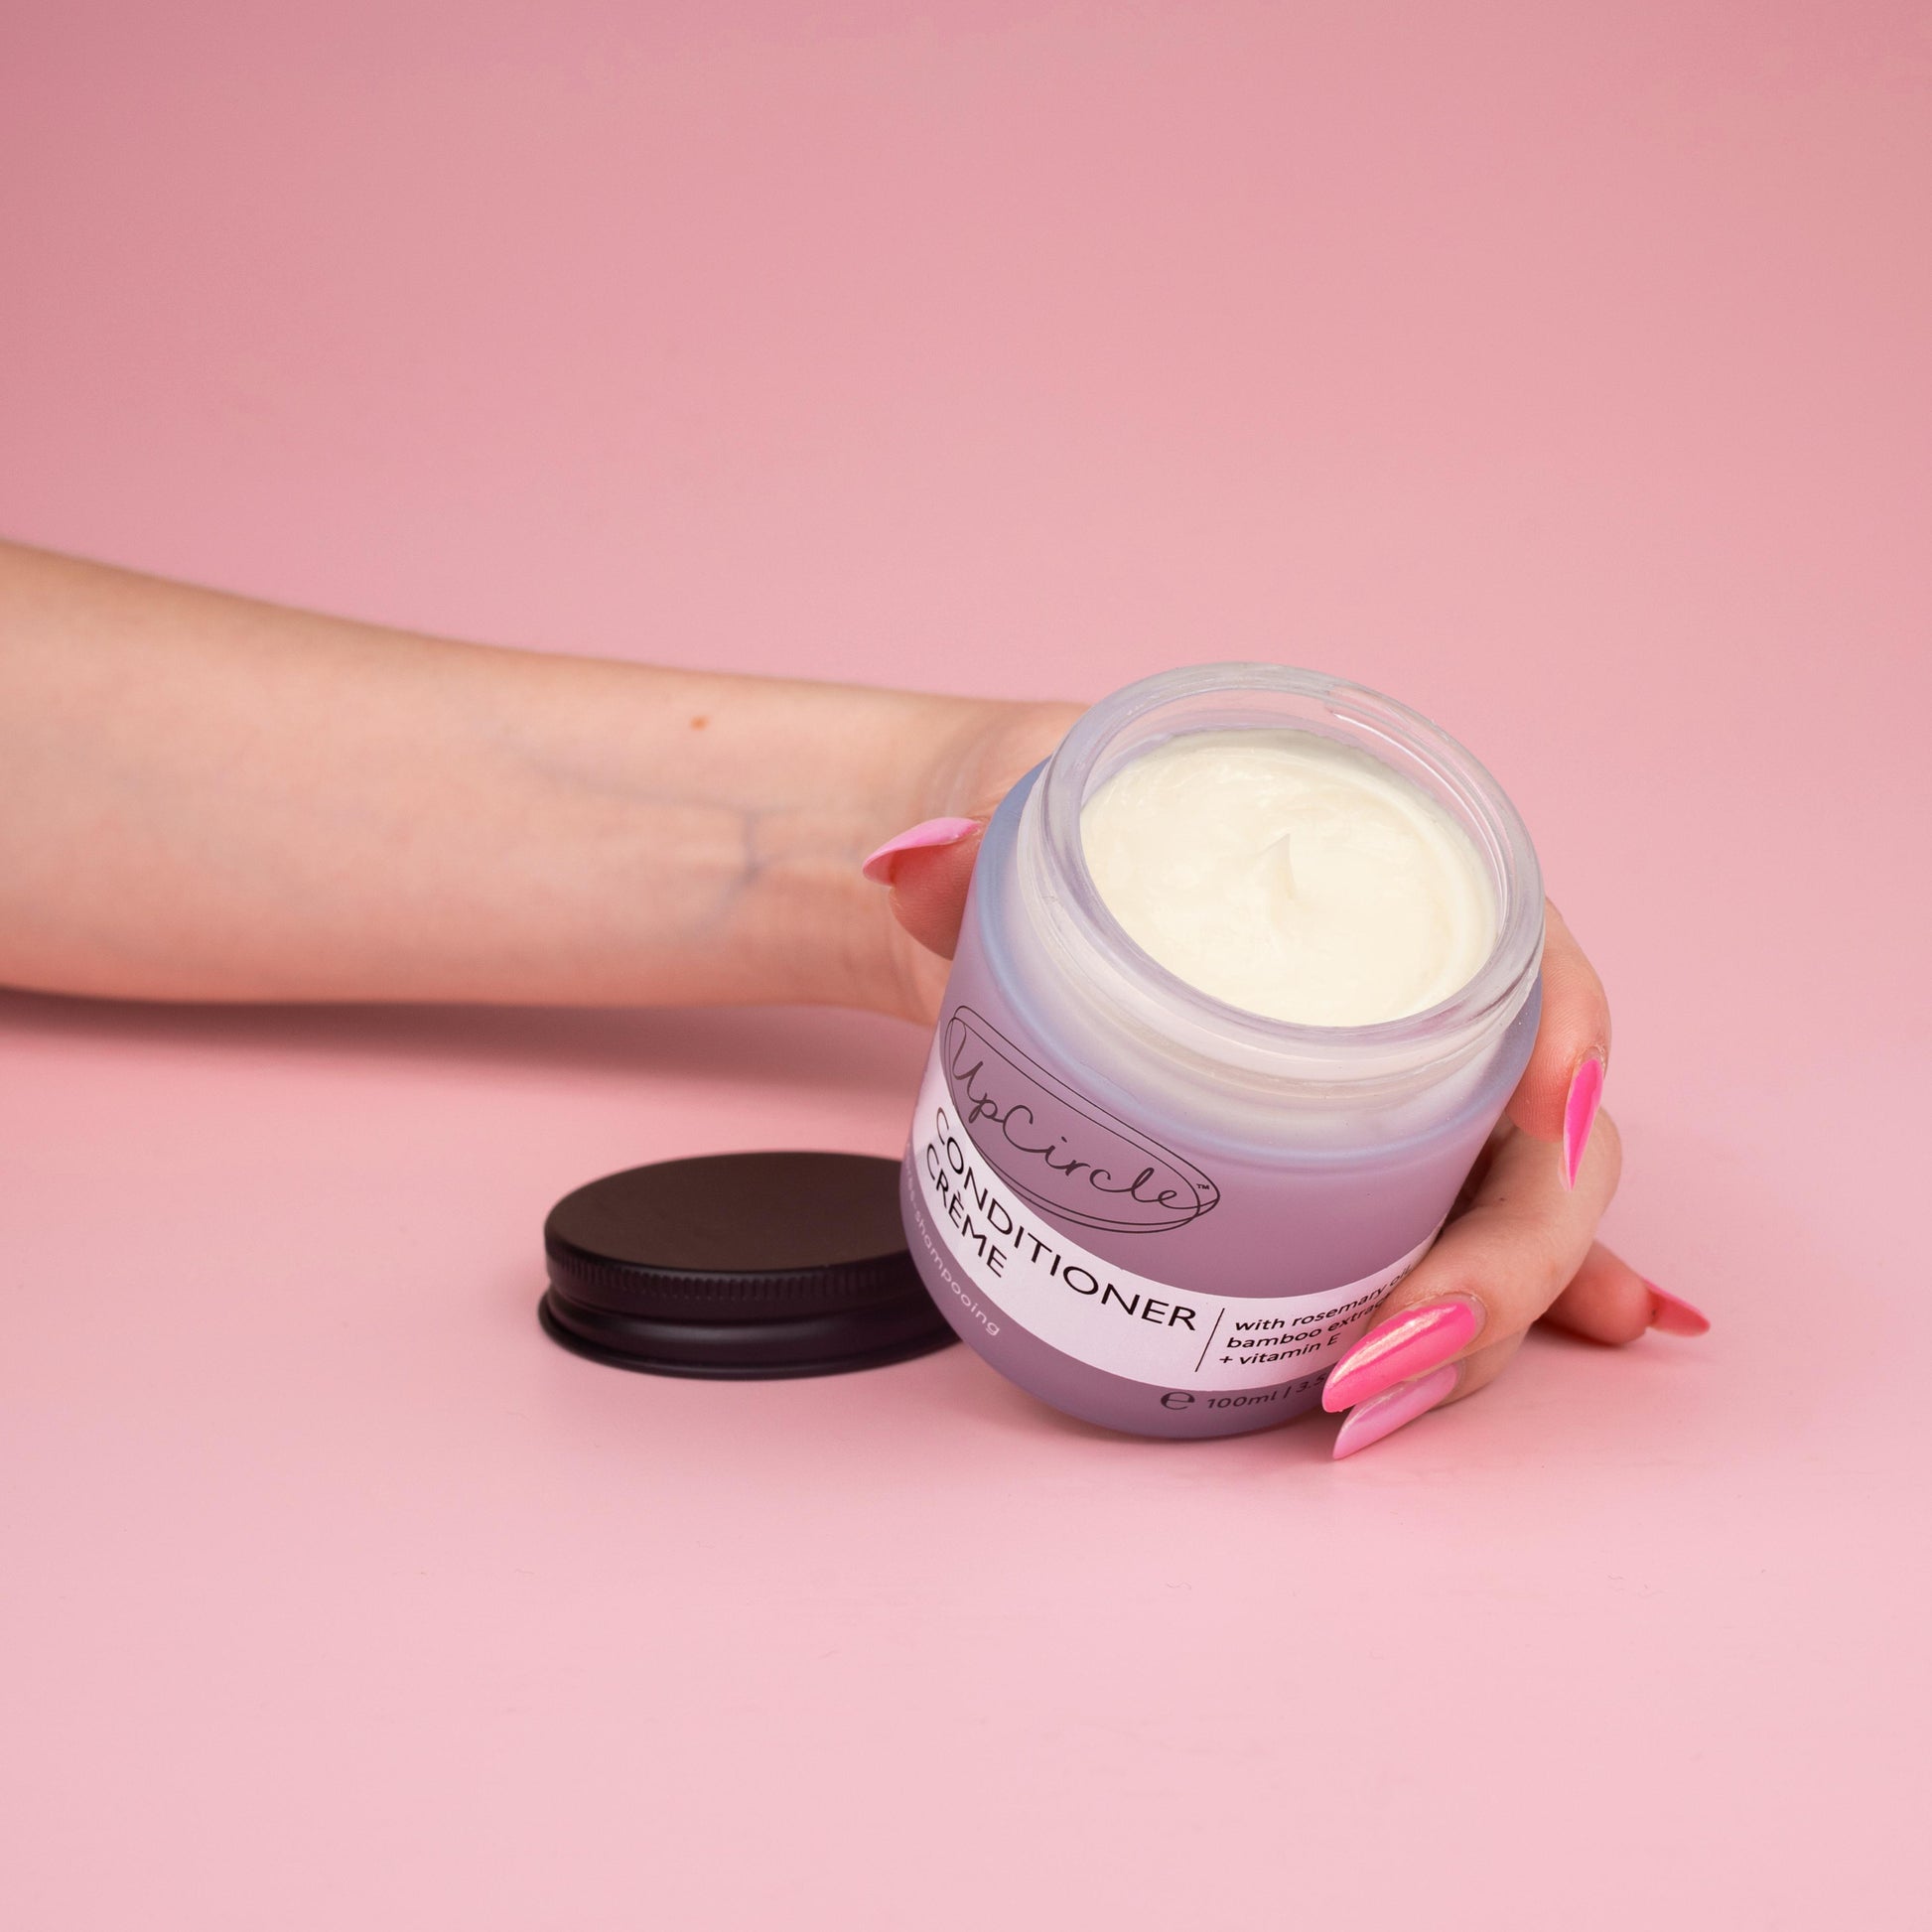 lifestyle photo of upcircle's conditioner cream on a pink background. the conditioner is in a blue/lilac frosted glass jar with black aluminium lid. The jar is open and you can see the creamy texture of the conditioner inside. It is being held by a woman's hand with multi tonal pink finger nails tilted towards the front of the image